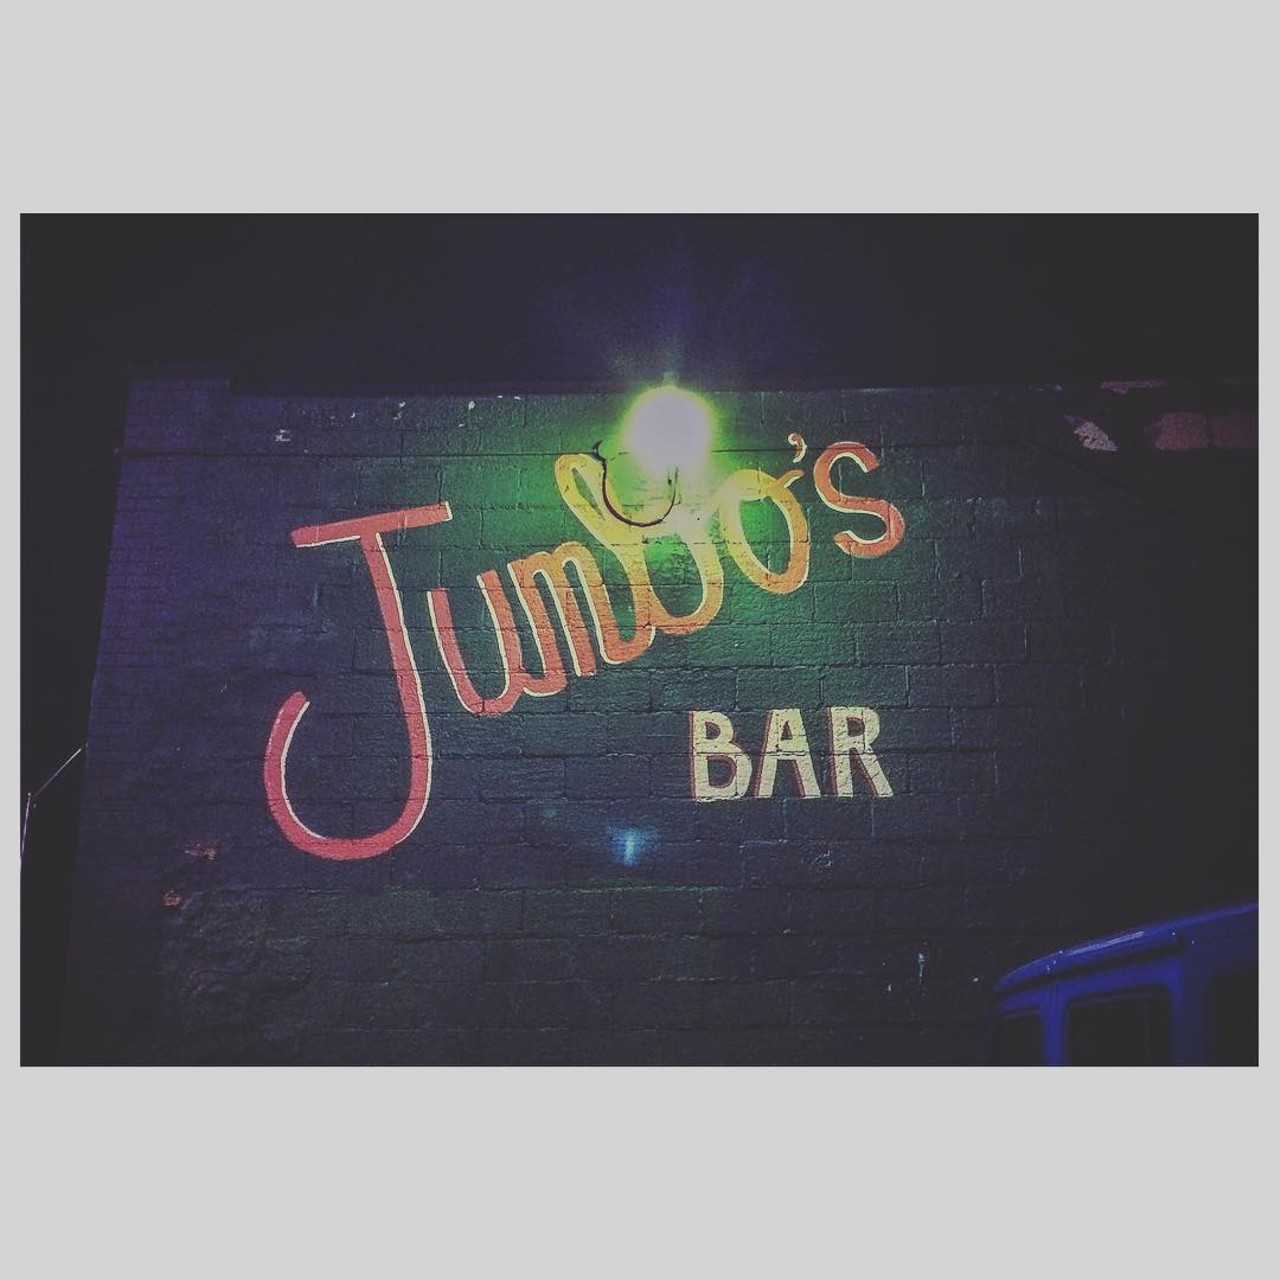 Jumbo&#146;s Bar
3736 3rd Ave, Detroit
(313)-831-8949
The ultimate neighborhood bar, Jumbo&#146;s is a place where you can sit at the bar for hours on end and not be bothered by anyone. Don&#146;t want to talk about the election? Not a problem. 
Photo via IG user @detroit_dzikus